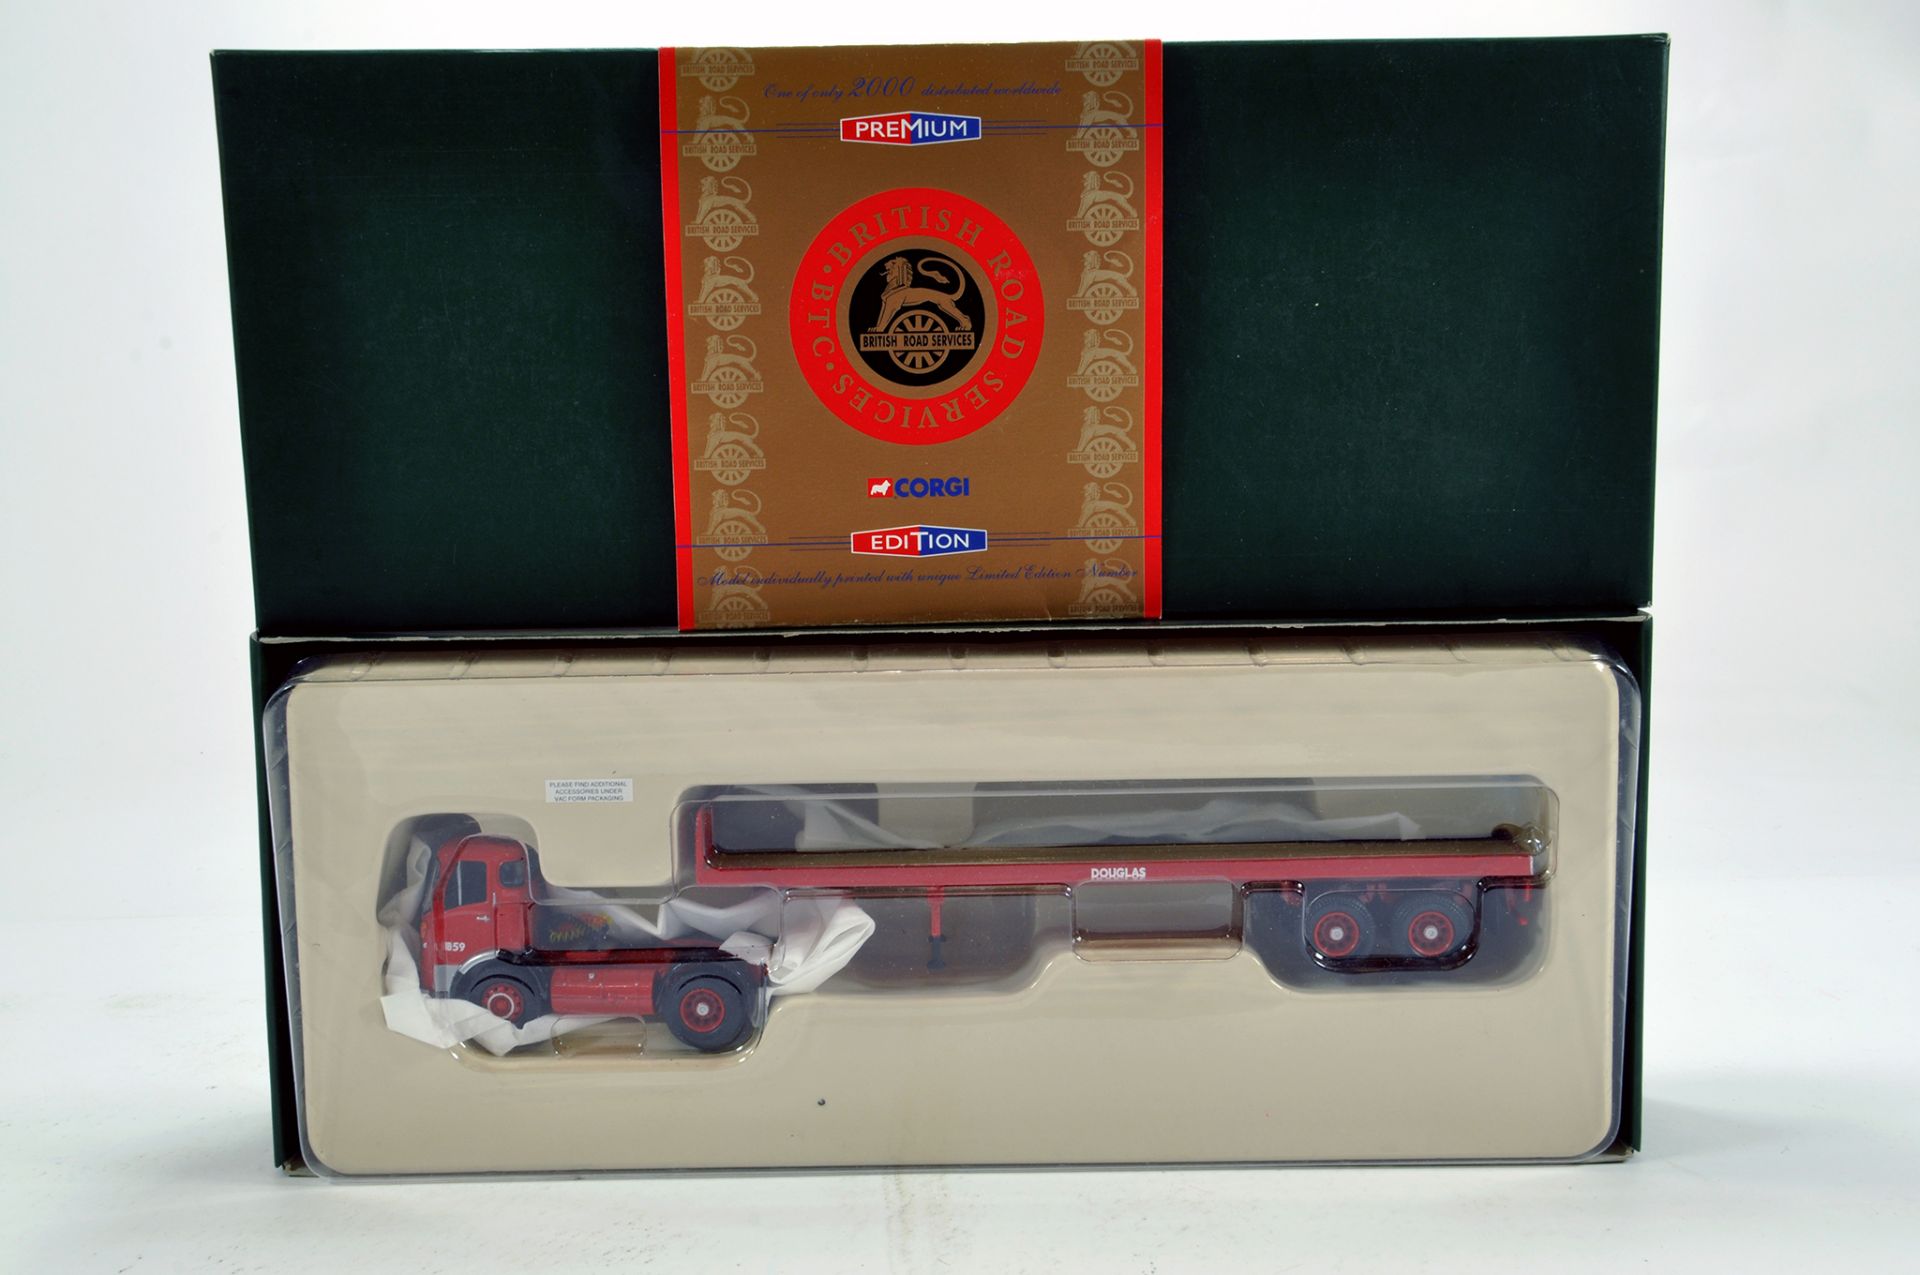 Corgi 1/50 Diecast Truck Issue Comprising Premium issue in livery of BRS. NM to M in Box.